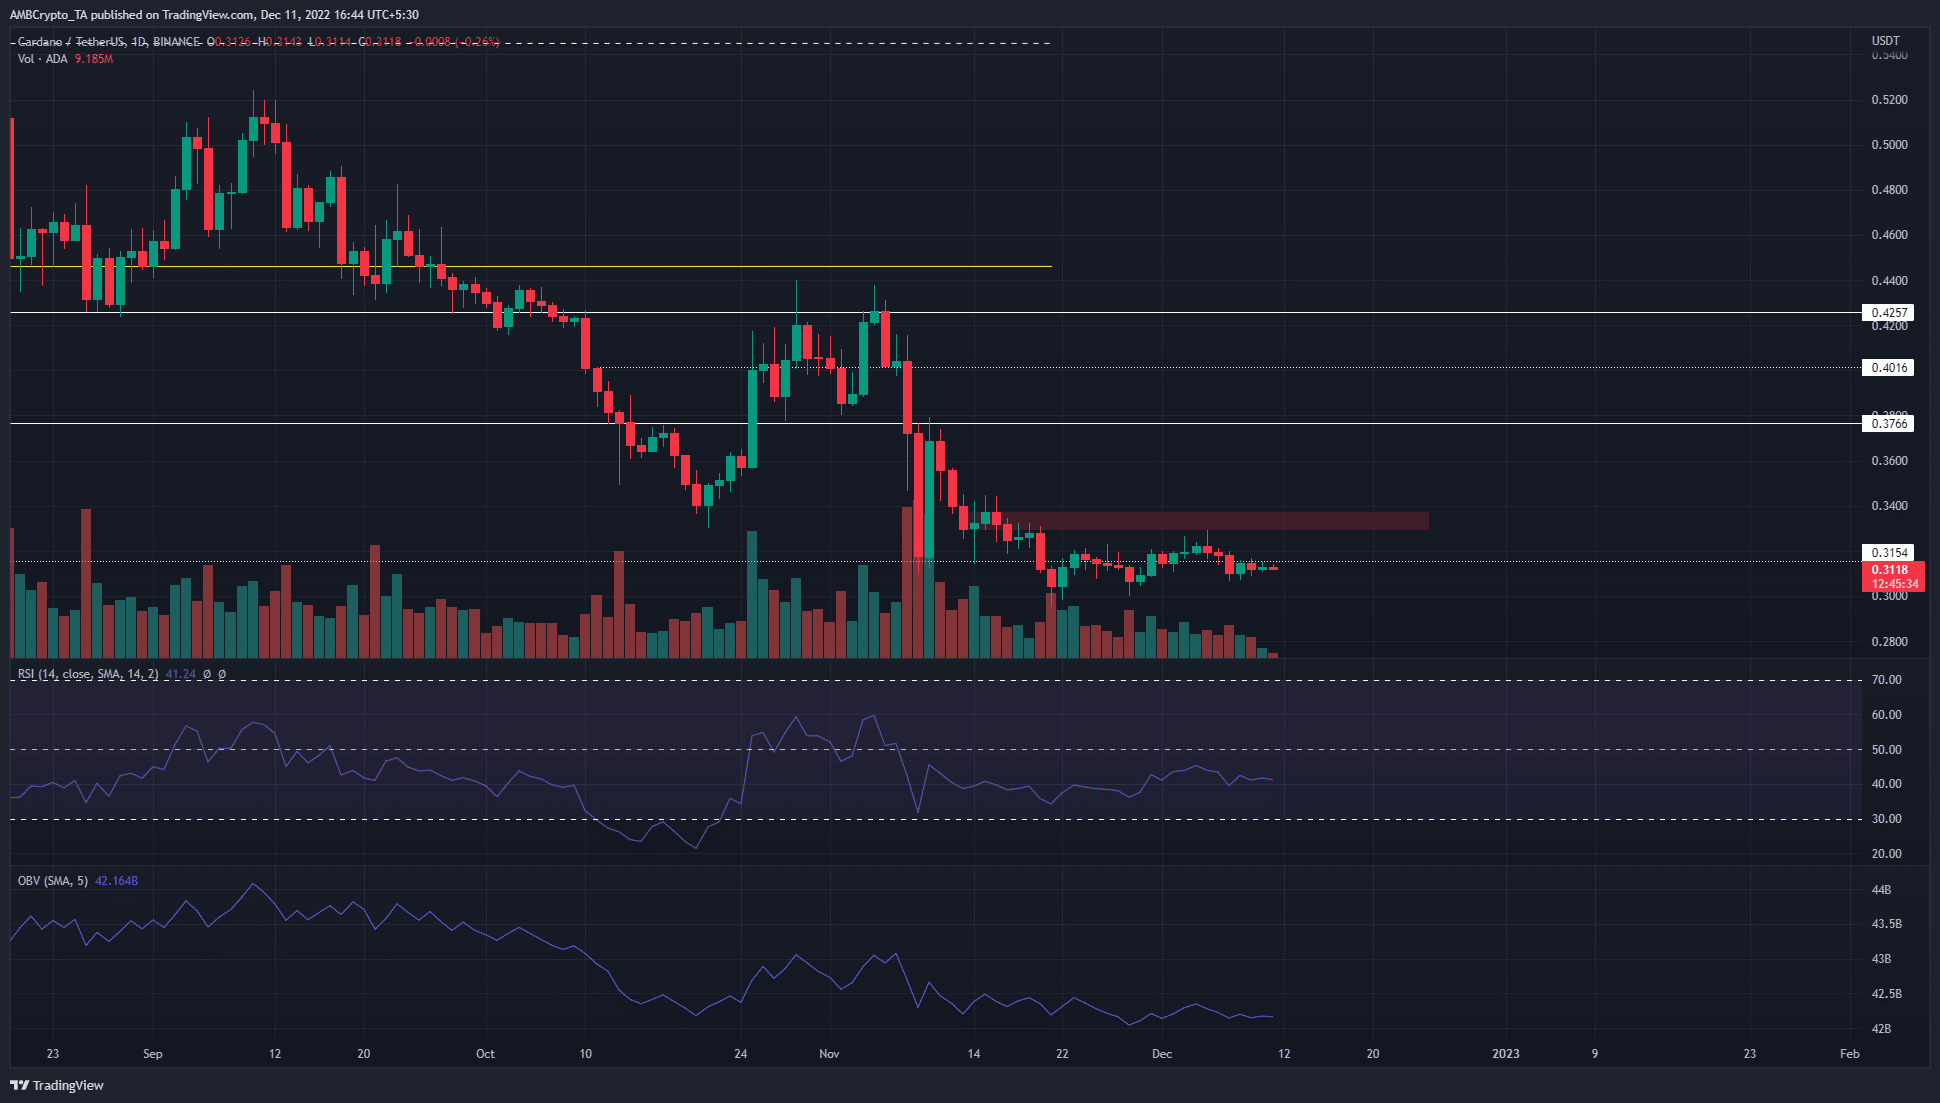 Cardano bulls will be revived only after a move above...